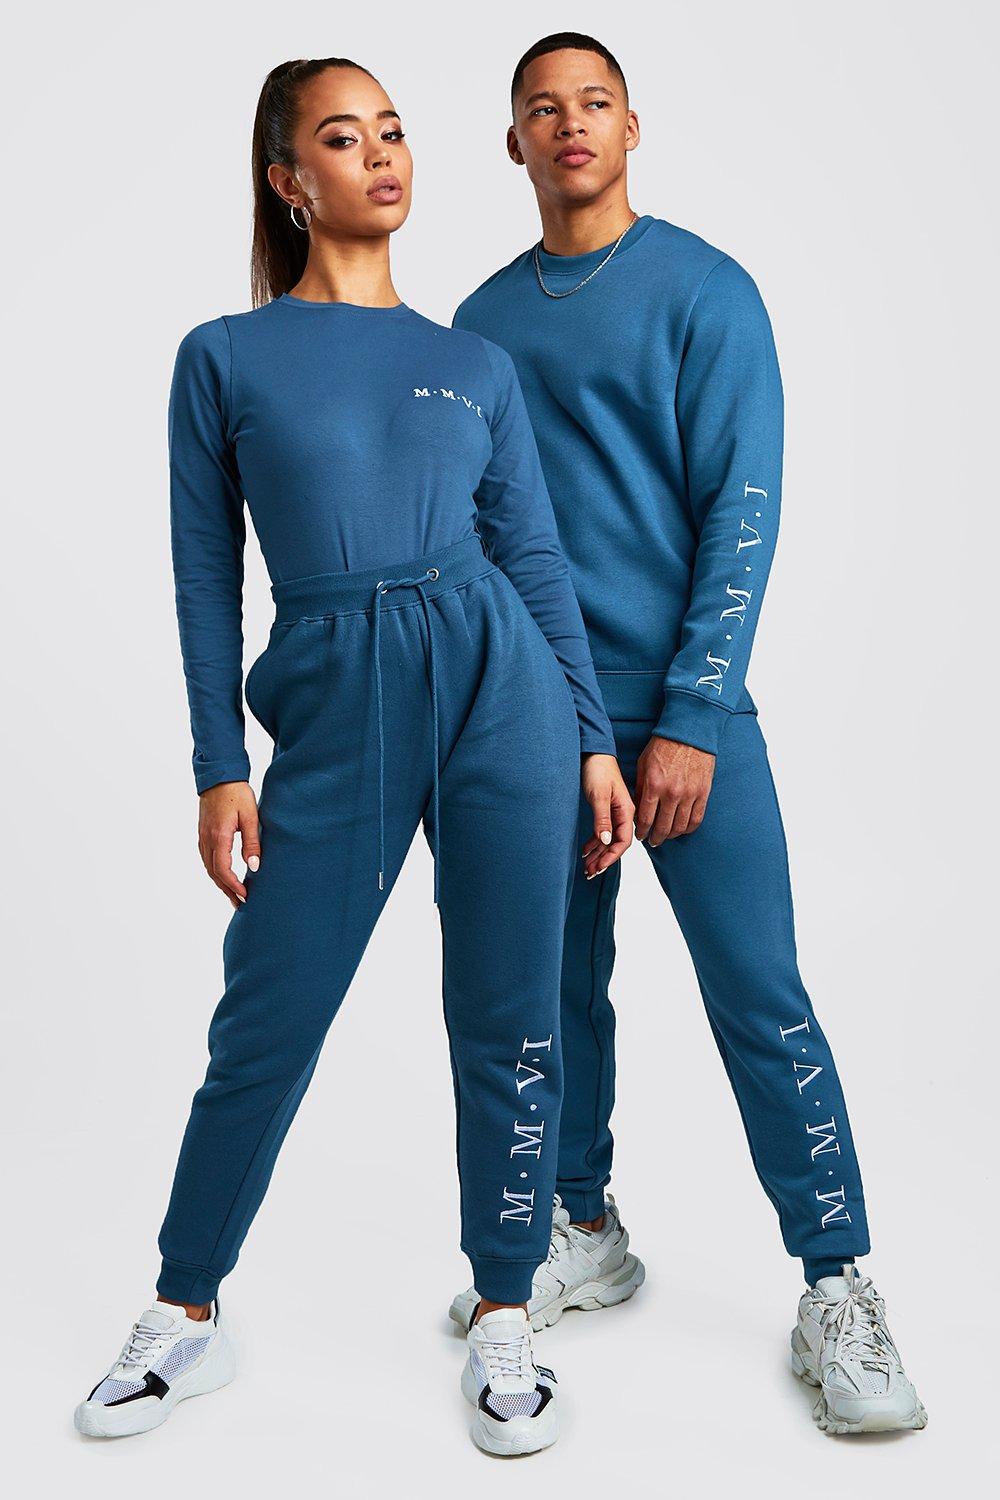 boohoo his and hers tracksuits